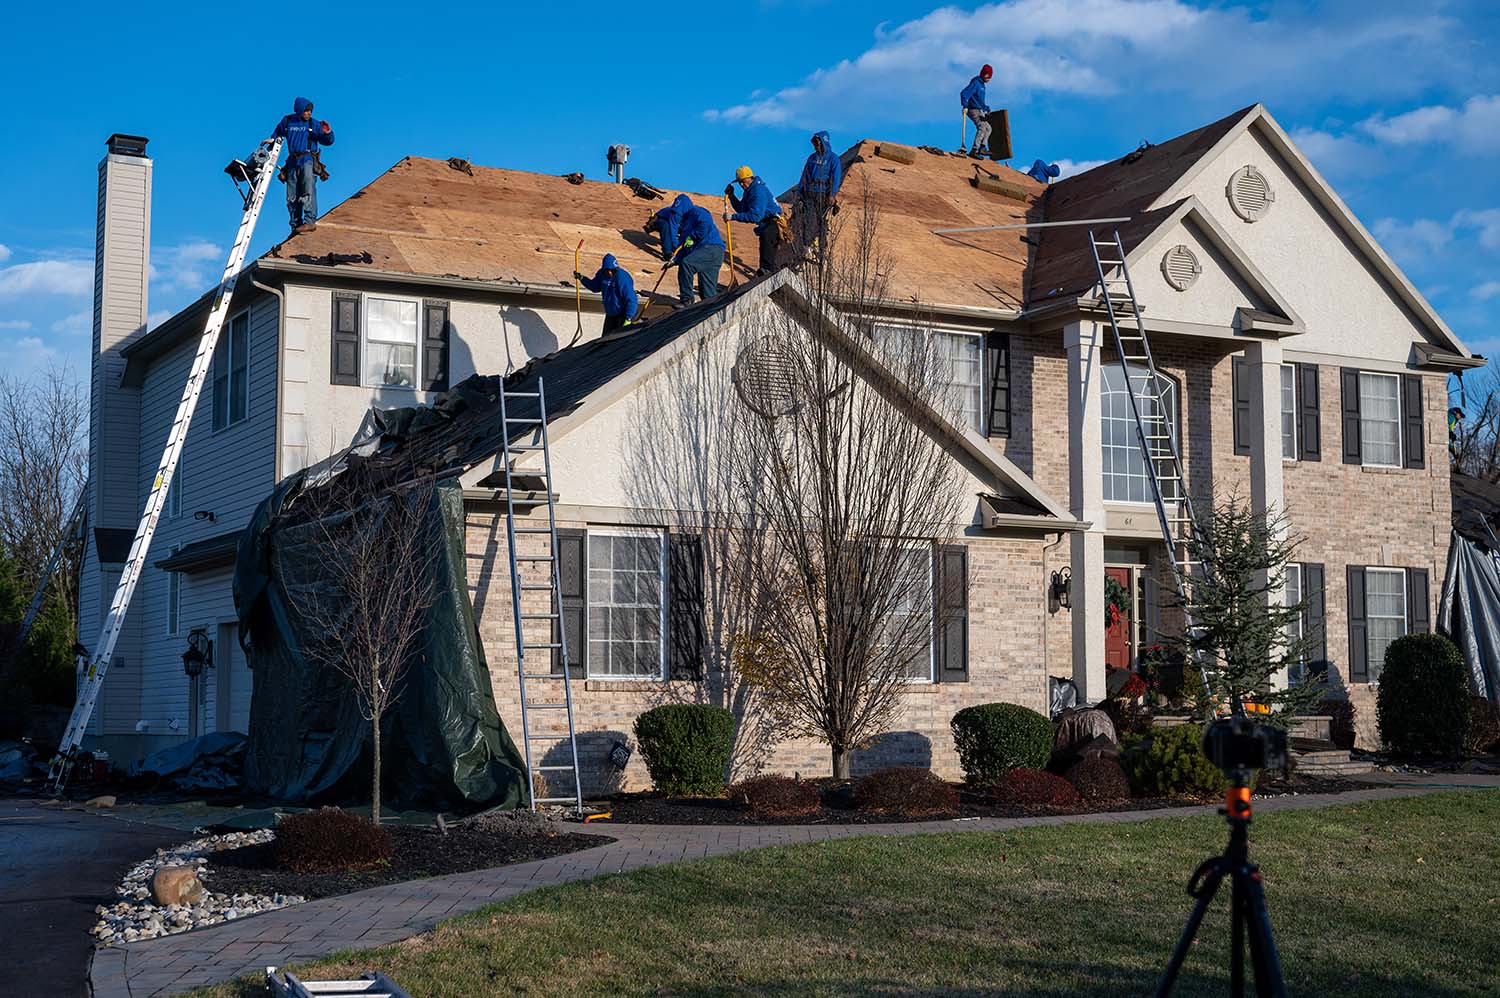 Roofing repair company - residential roofing contractors in Jenkintown, PA (medium image)